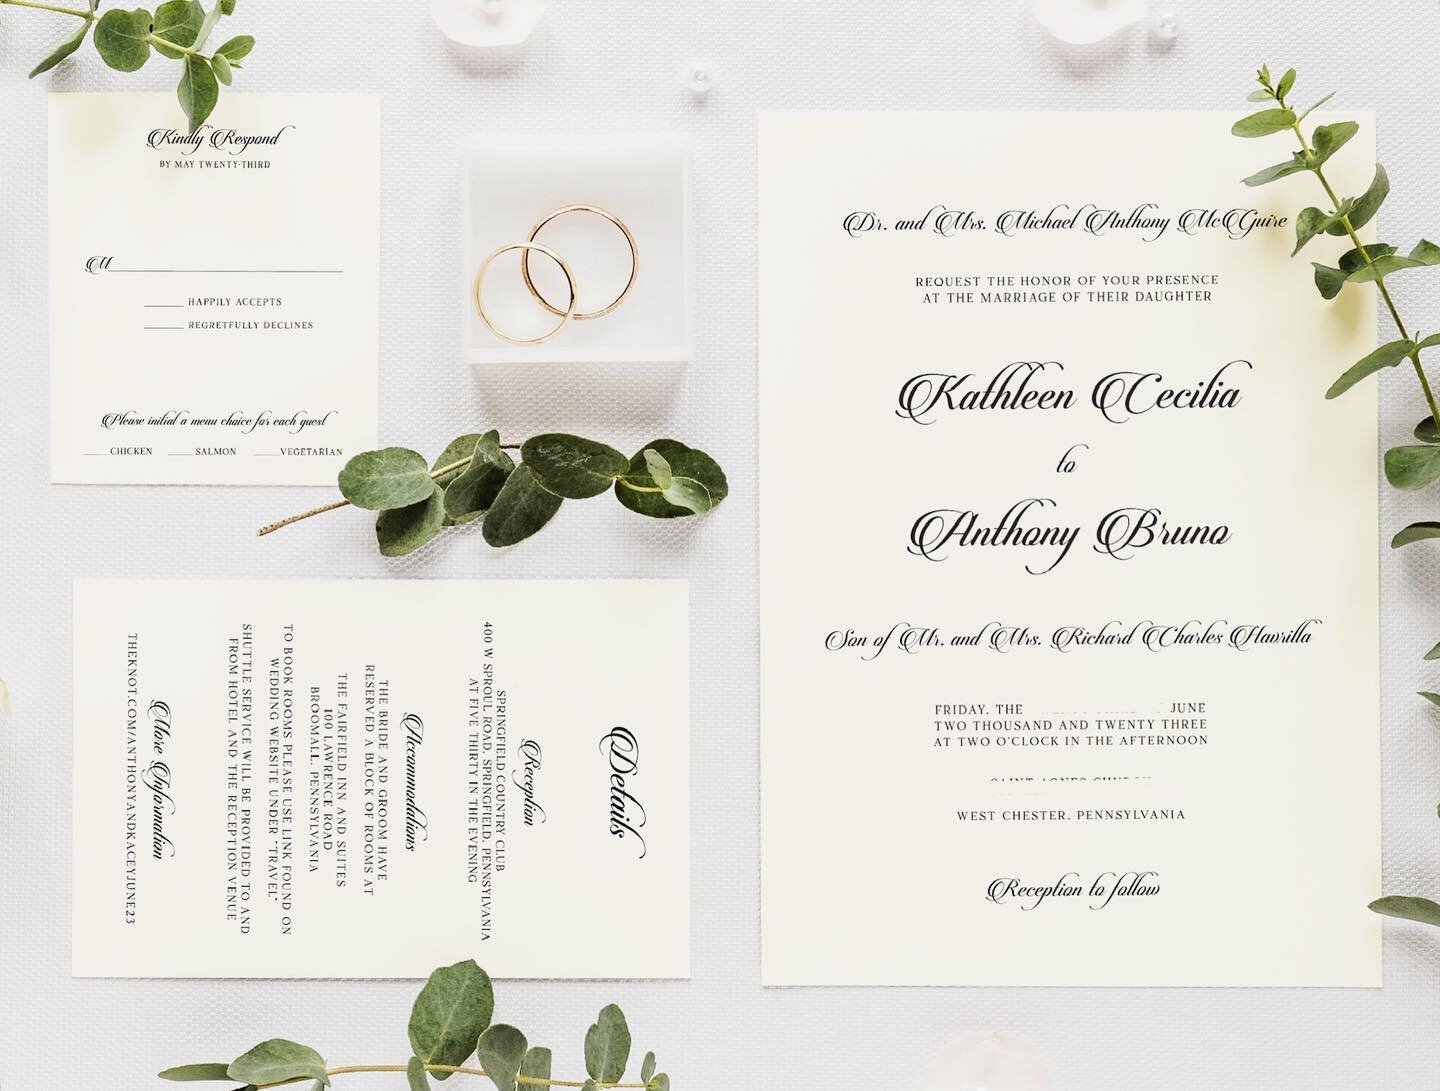 Our most popular font strikes again! 🖋️✨
Classic, elegant, timeless - this script never fails for our more traditional brides!
&bull;

#weddinginvitations #weddinginspiration #custominvitations #invitations #invitationdesign #invitationdesigner #dmv